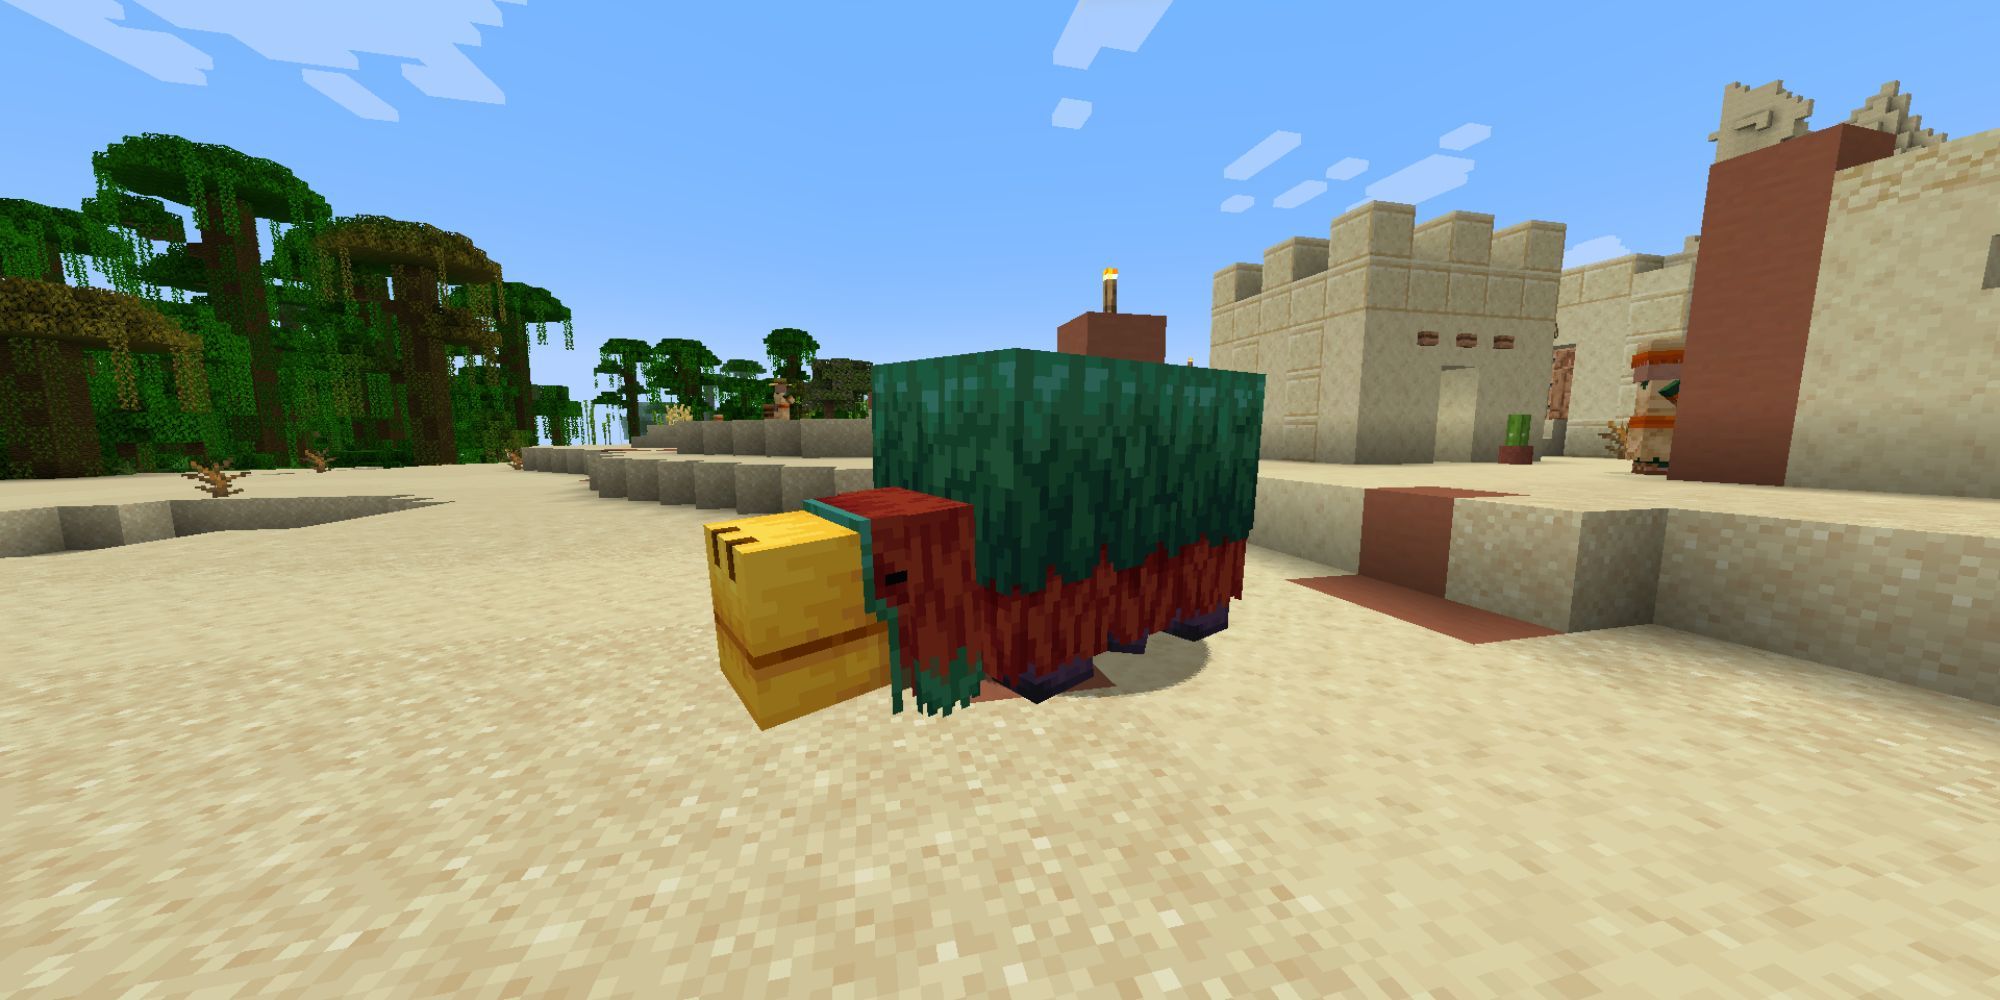 A Sniffer with red and green fur, and a gold snout walking through a desert village.